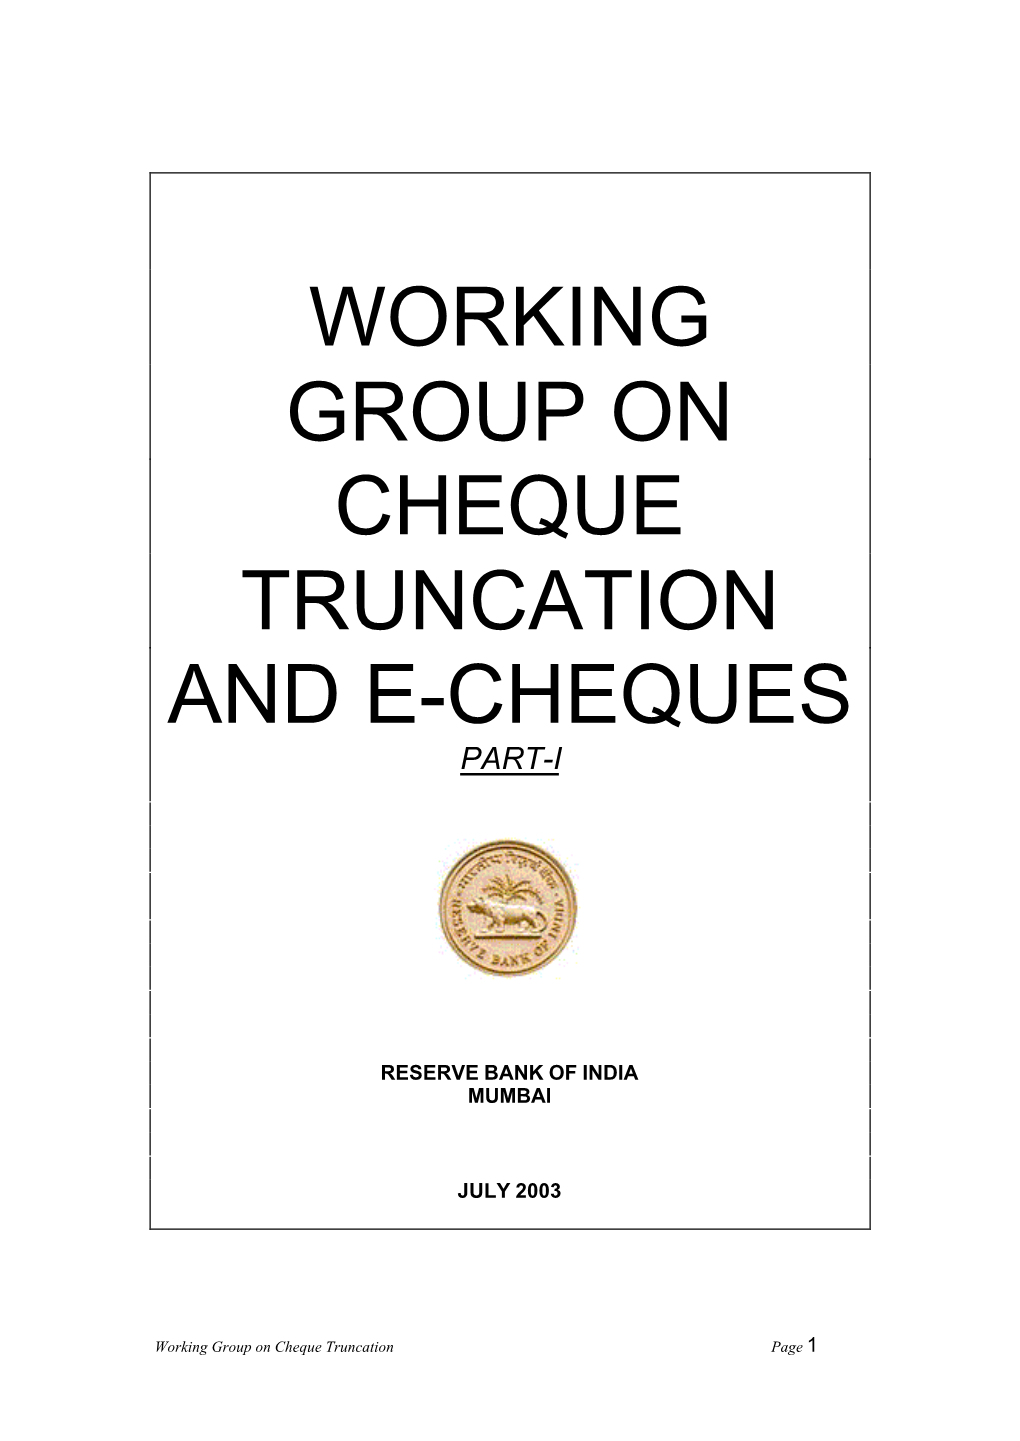 Working Group on Cheque Truncation and E-Cheques Part-I